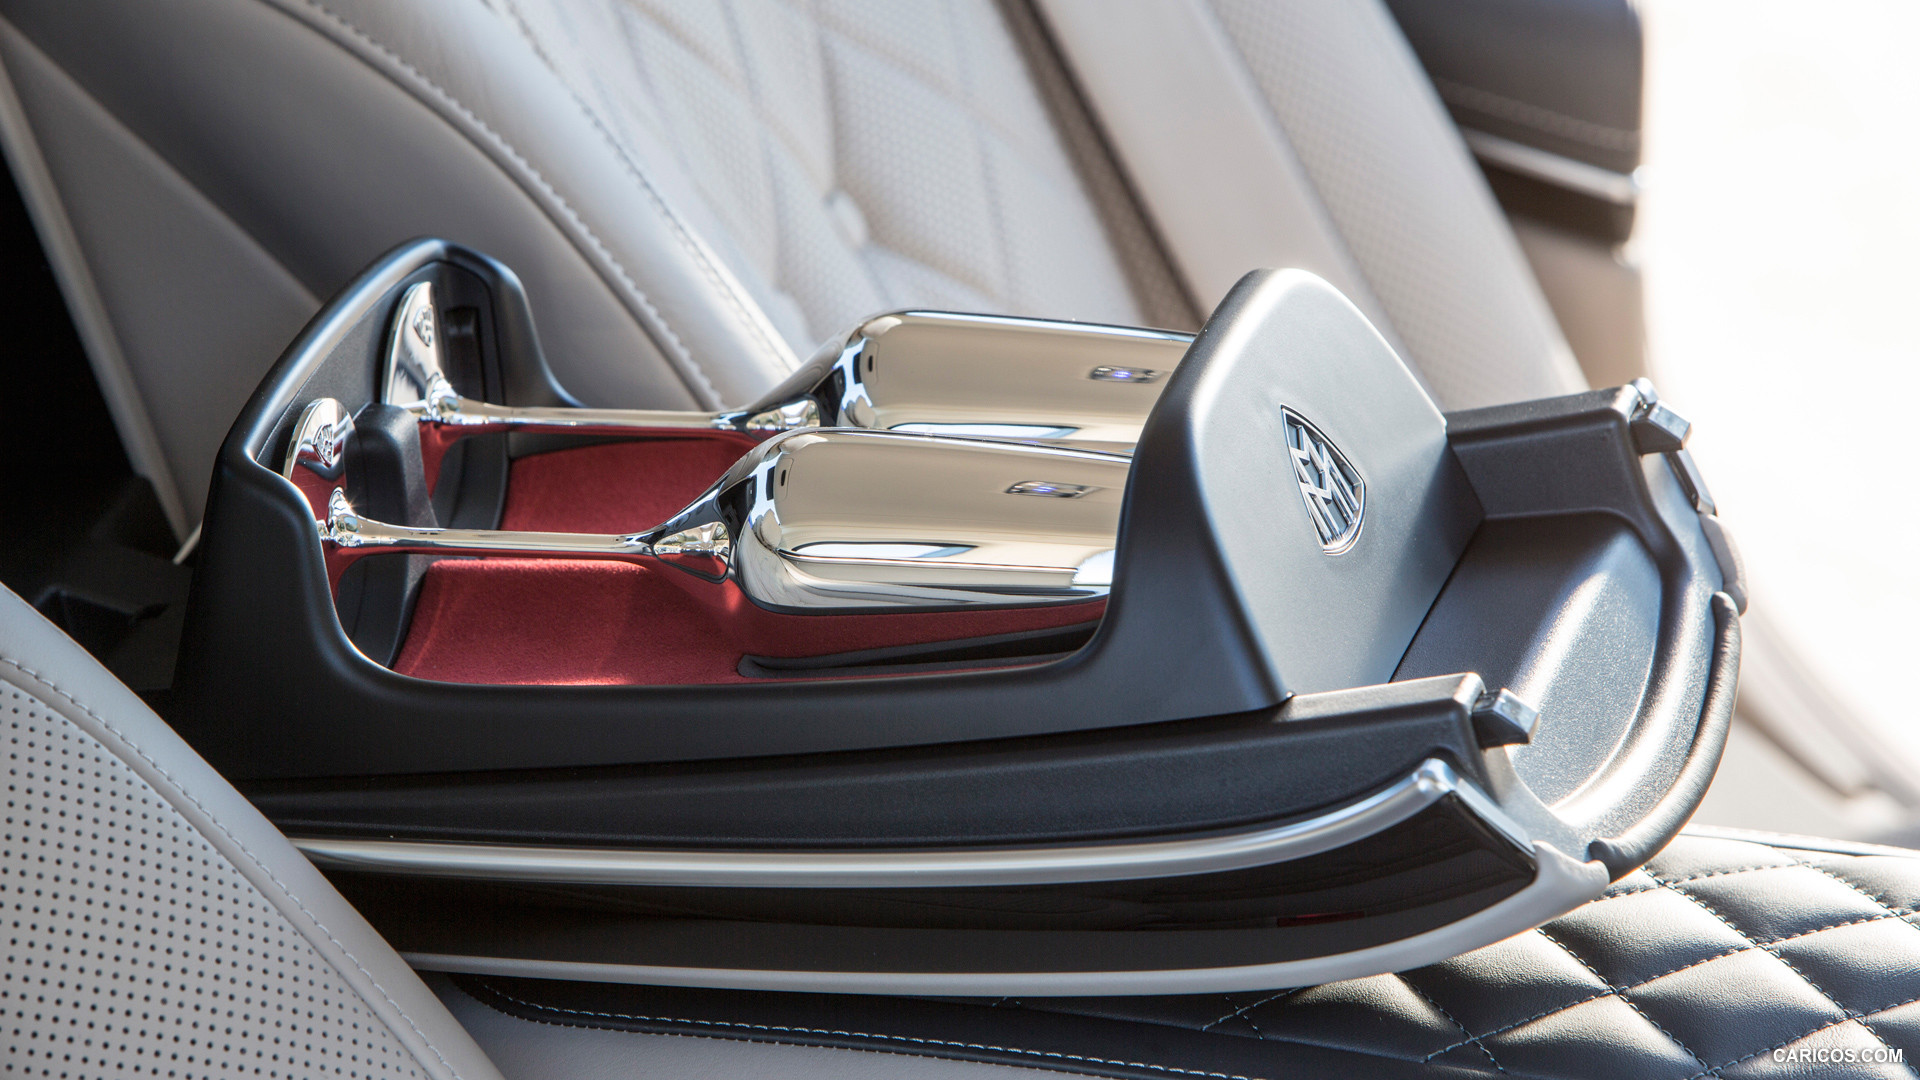 2016 Mercedes-Maybach S-Class S600 - Champagne Glasses - Interior Detail, #182 of 225